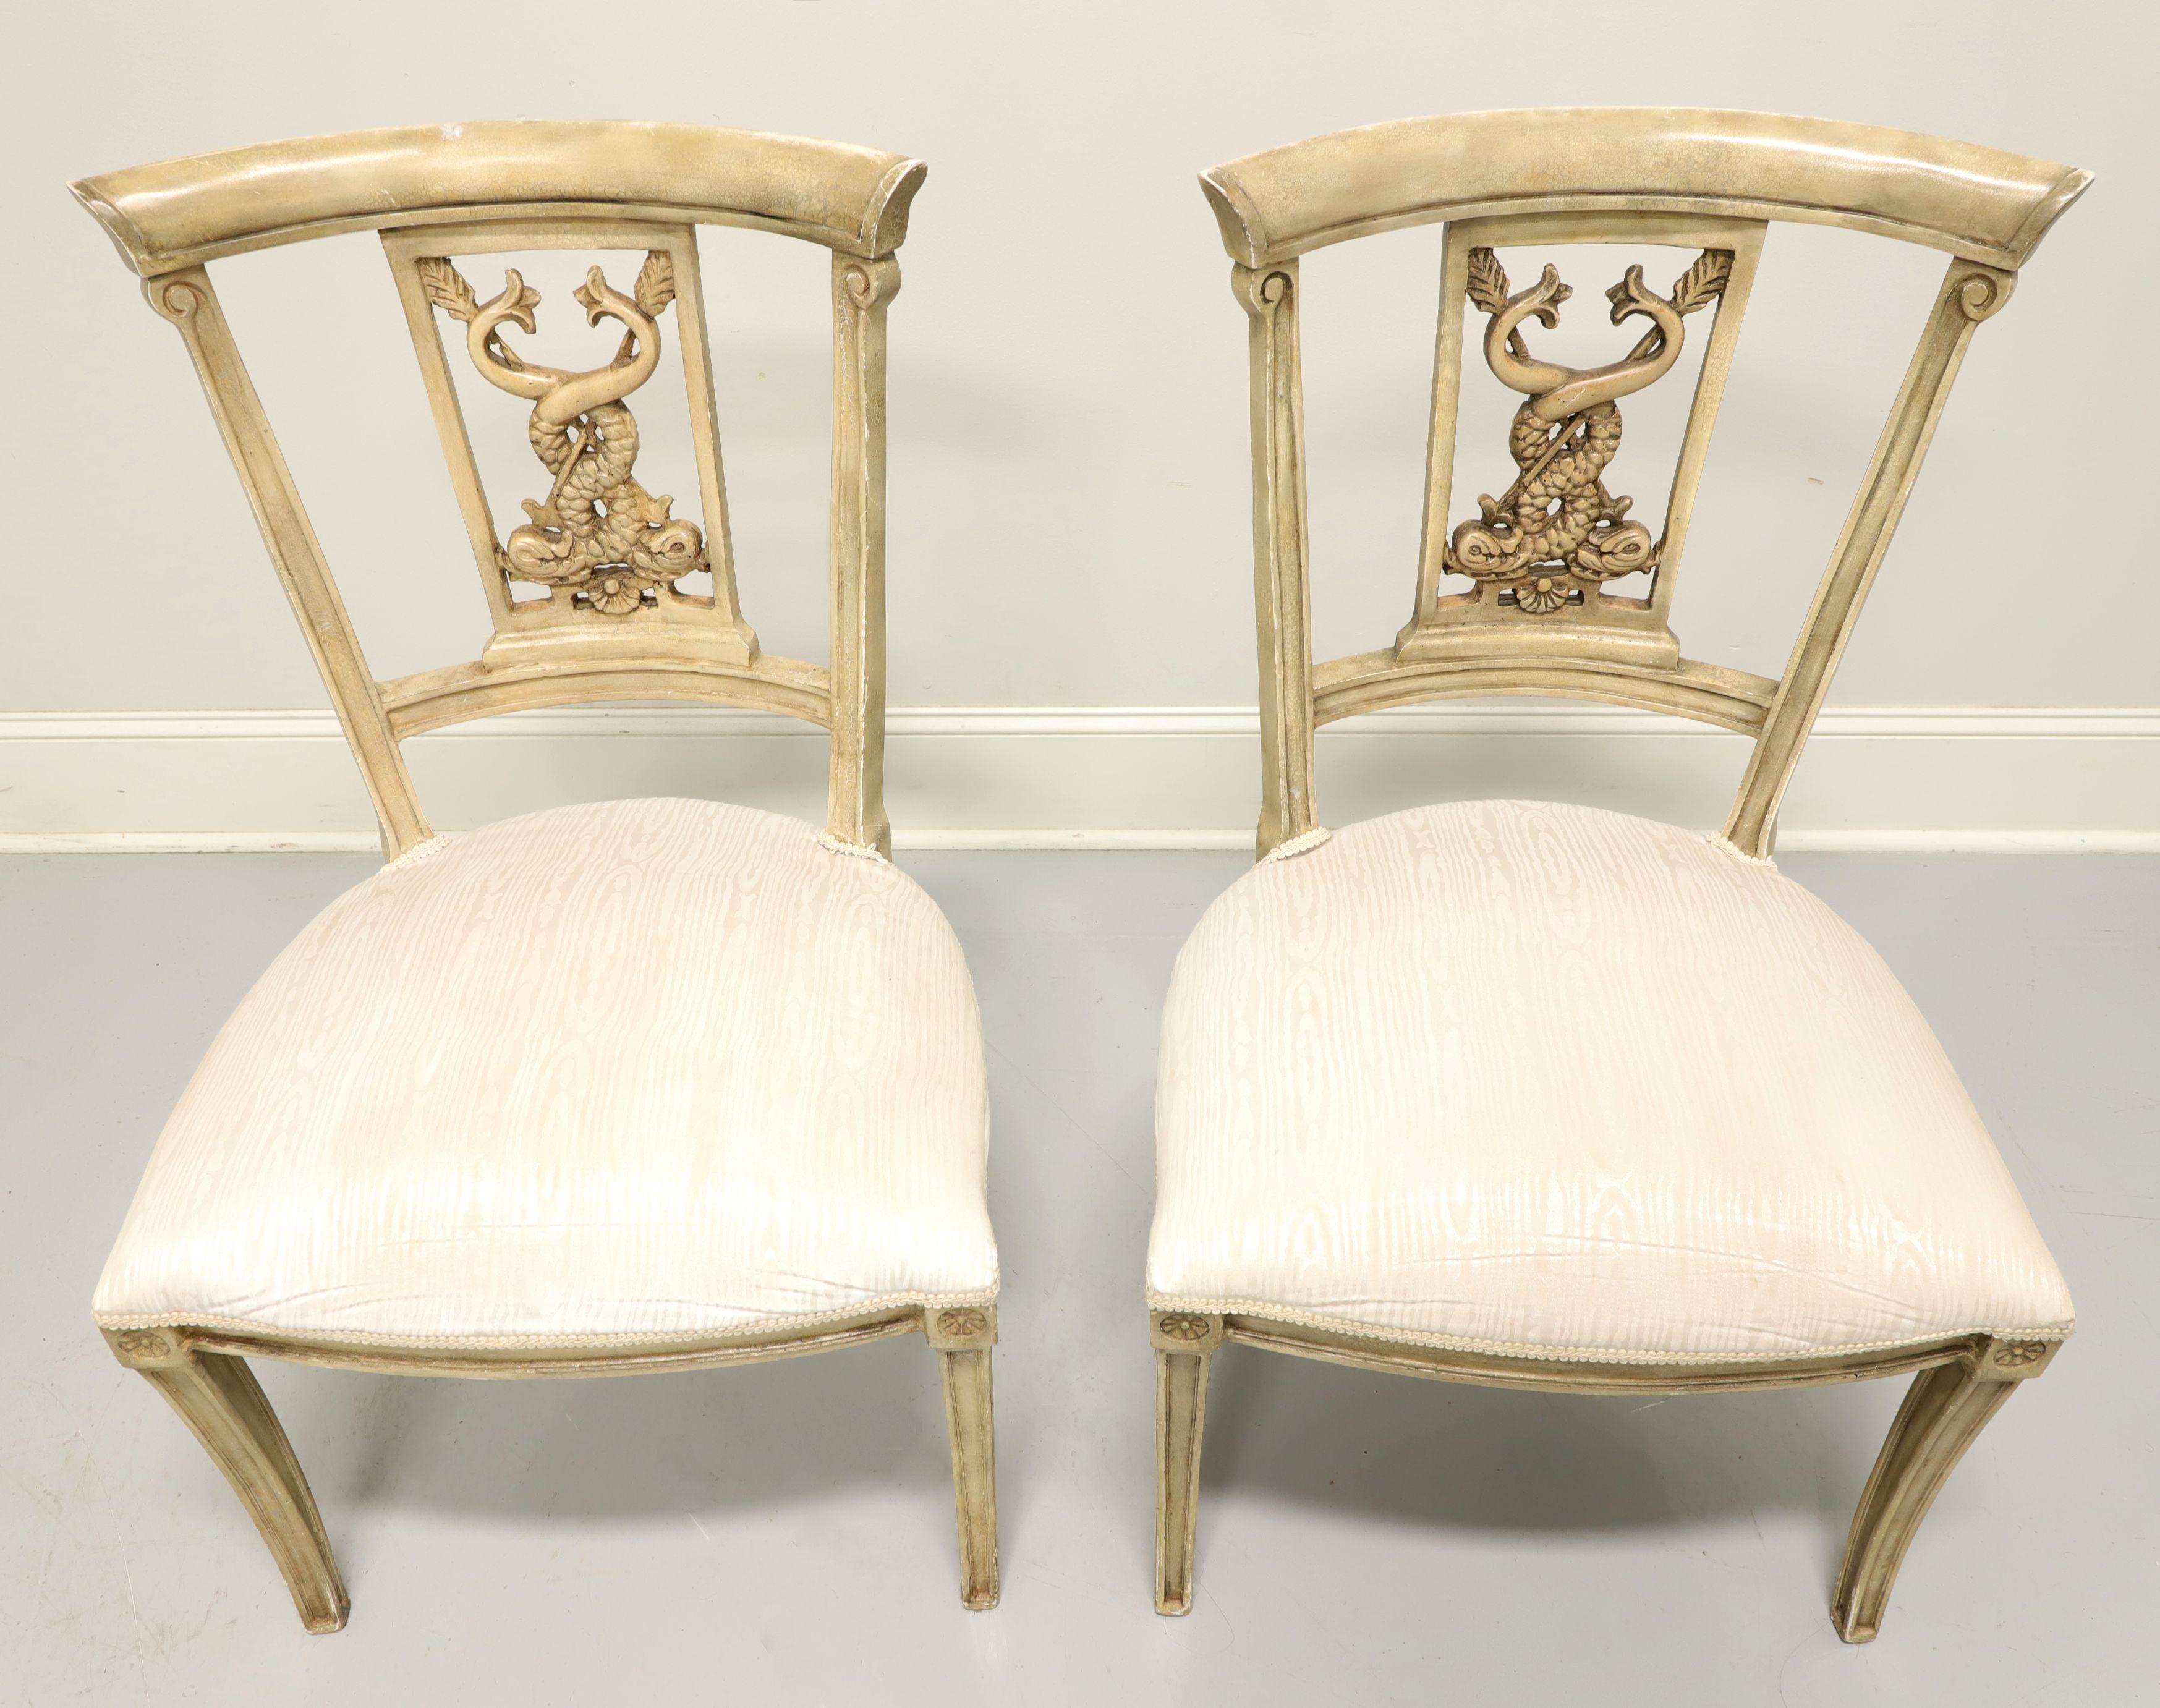 A pair of side chairs in the Italian Impero style, unbranded. Moulded heavy composite material in a pale brown color, smooth crest rail, serpent shaped back rest, cream colored satin like fabric upholstered seat, medallions to knees, and saber legs.